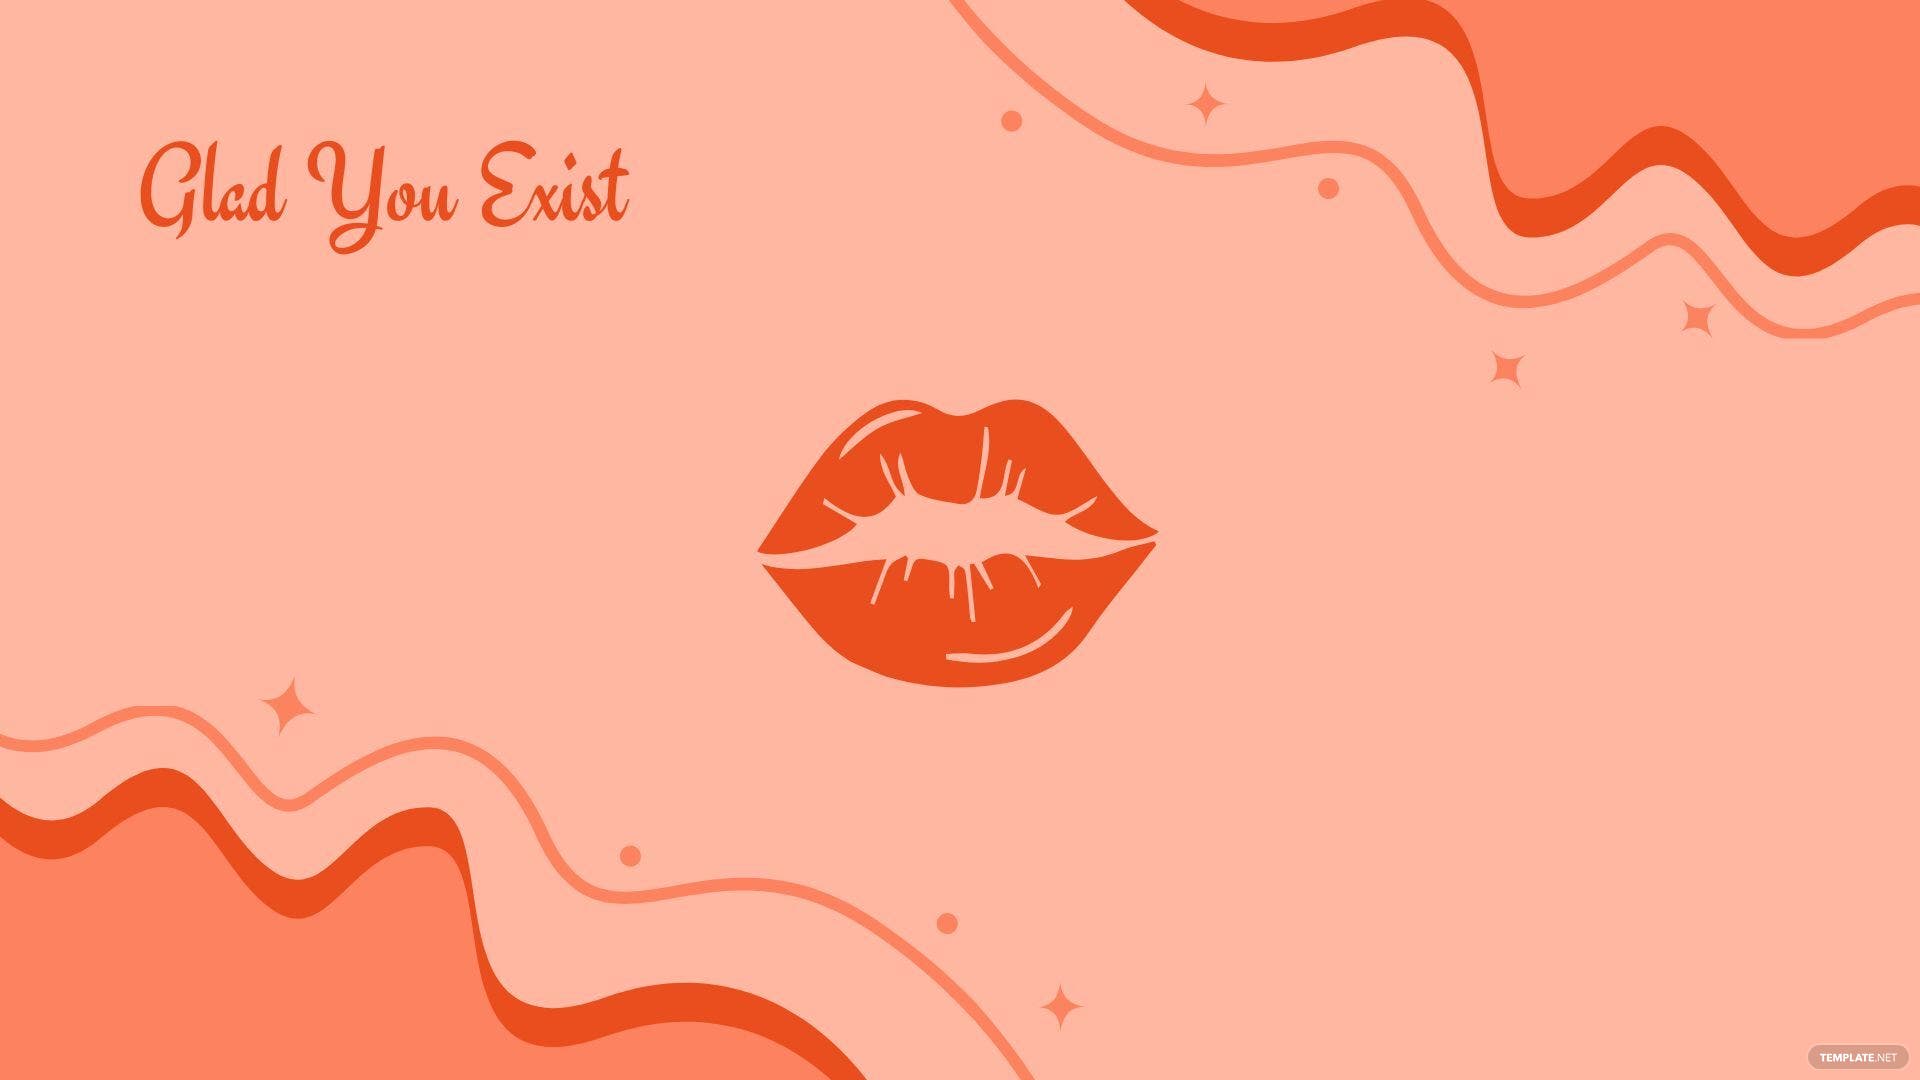 Wallpaper of a pair of lips with the text 